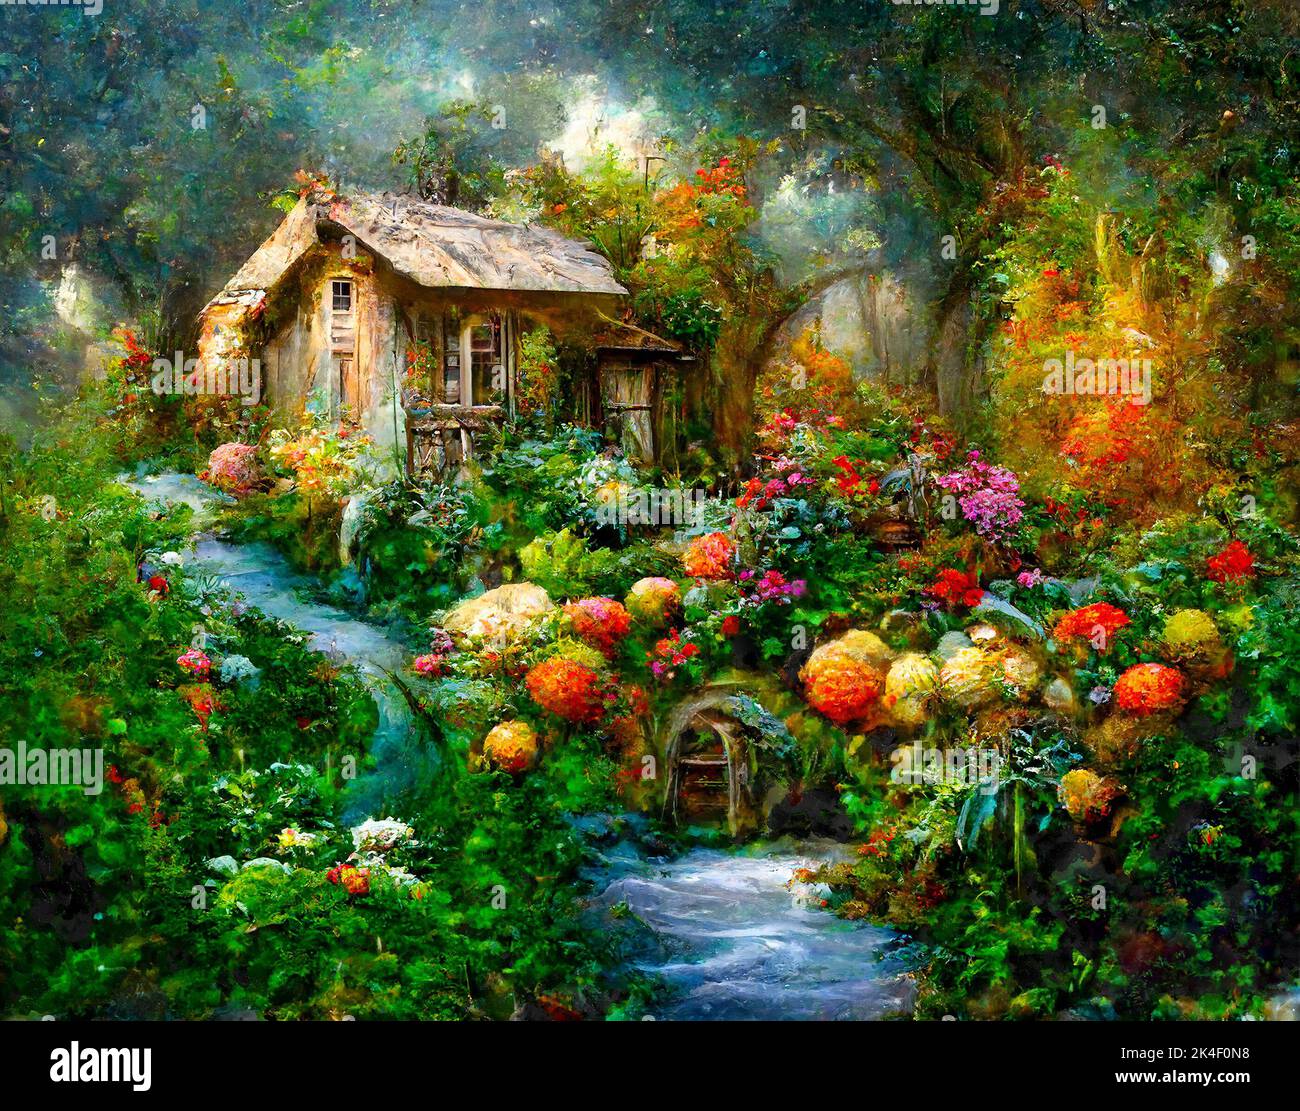 Fantasy cottage in summertime landscape with rainbow and butterflies. Art. Stock Photo